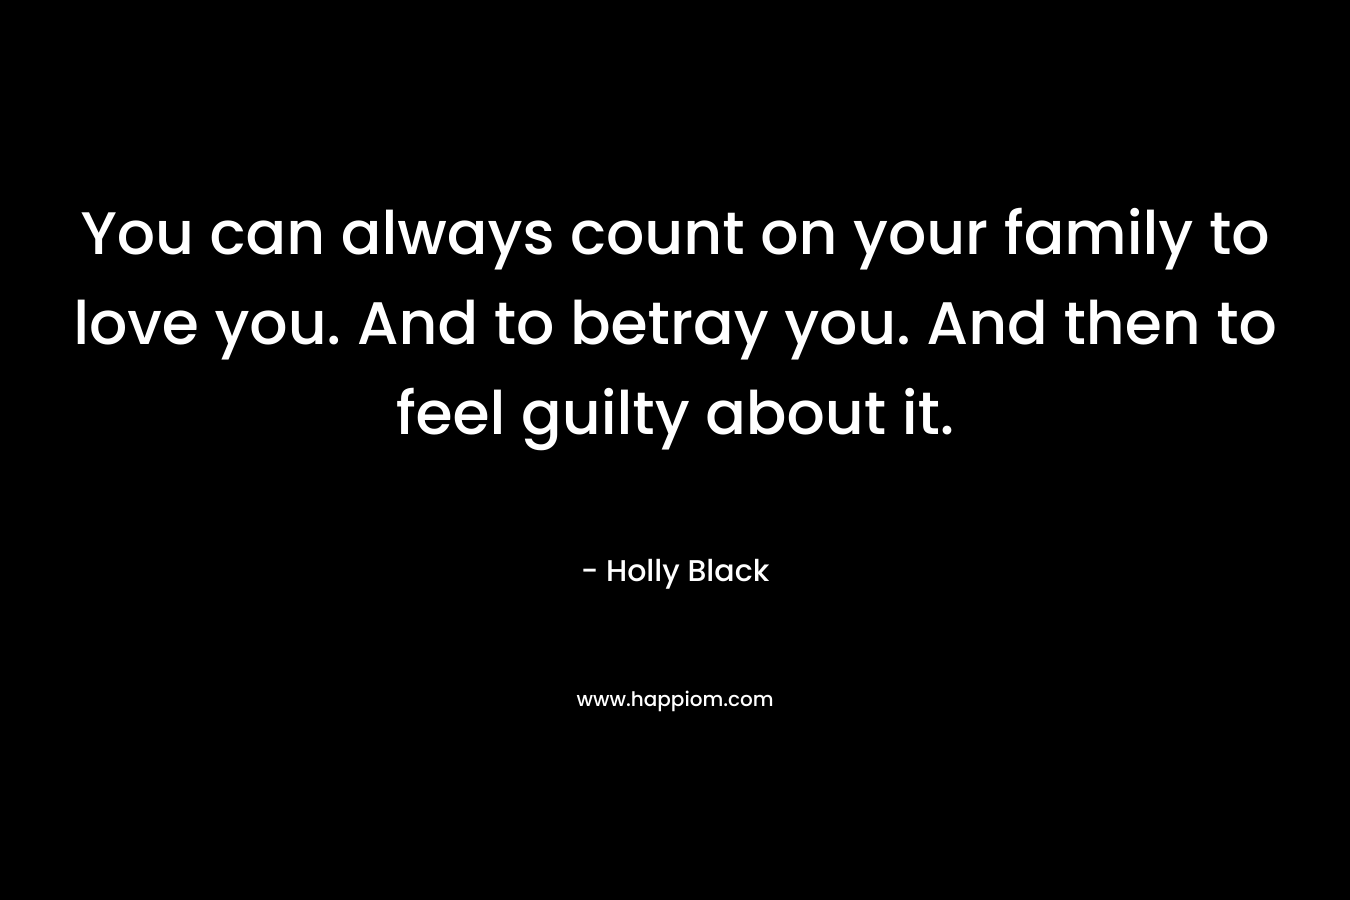 You can always count on your family to love you. And to betray you. And then to feel guilty about it. – Holly Black